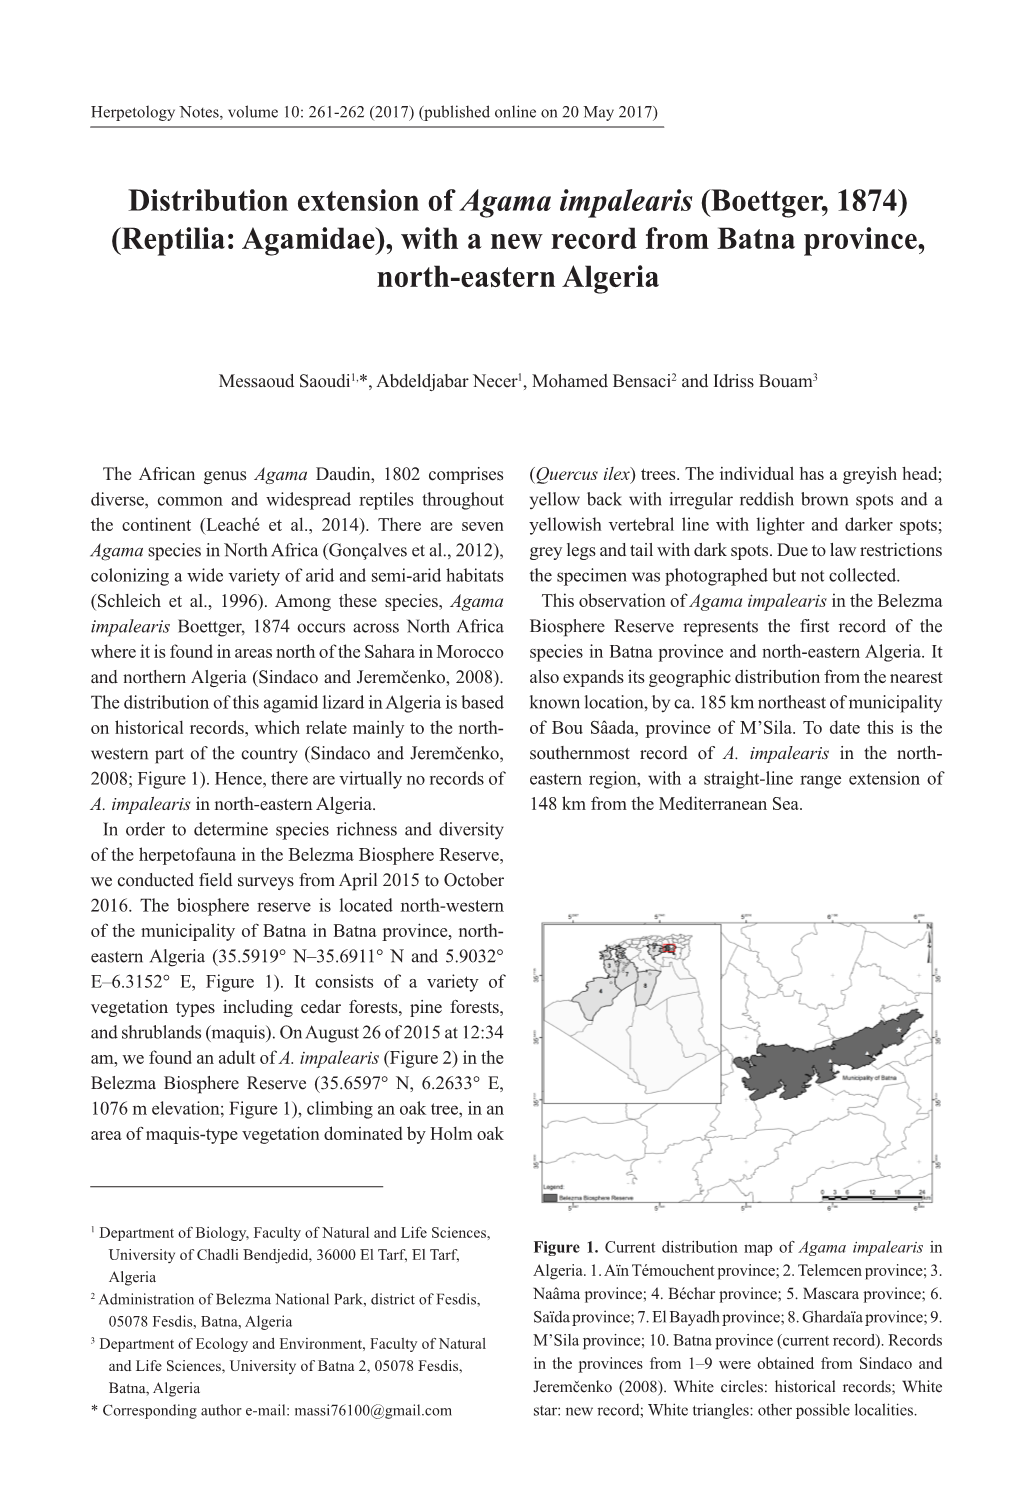 Distribution Extension of Agama Impalearis (Boettger, 1874) (Reptilia: Agamidae), with a New Record from Batna Province, North-Eastern Algeria